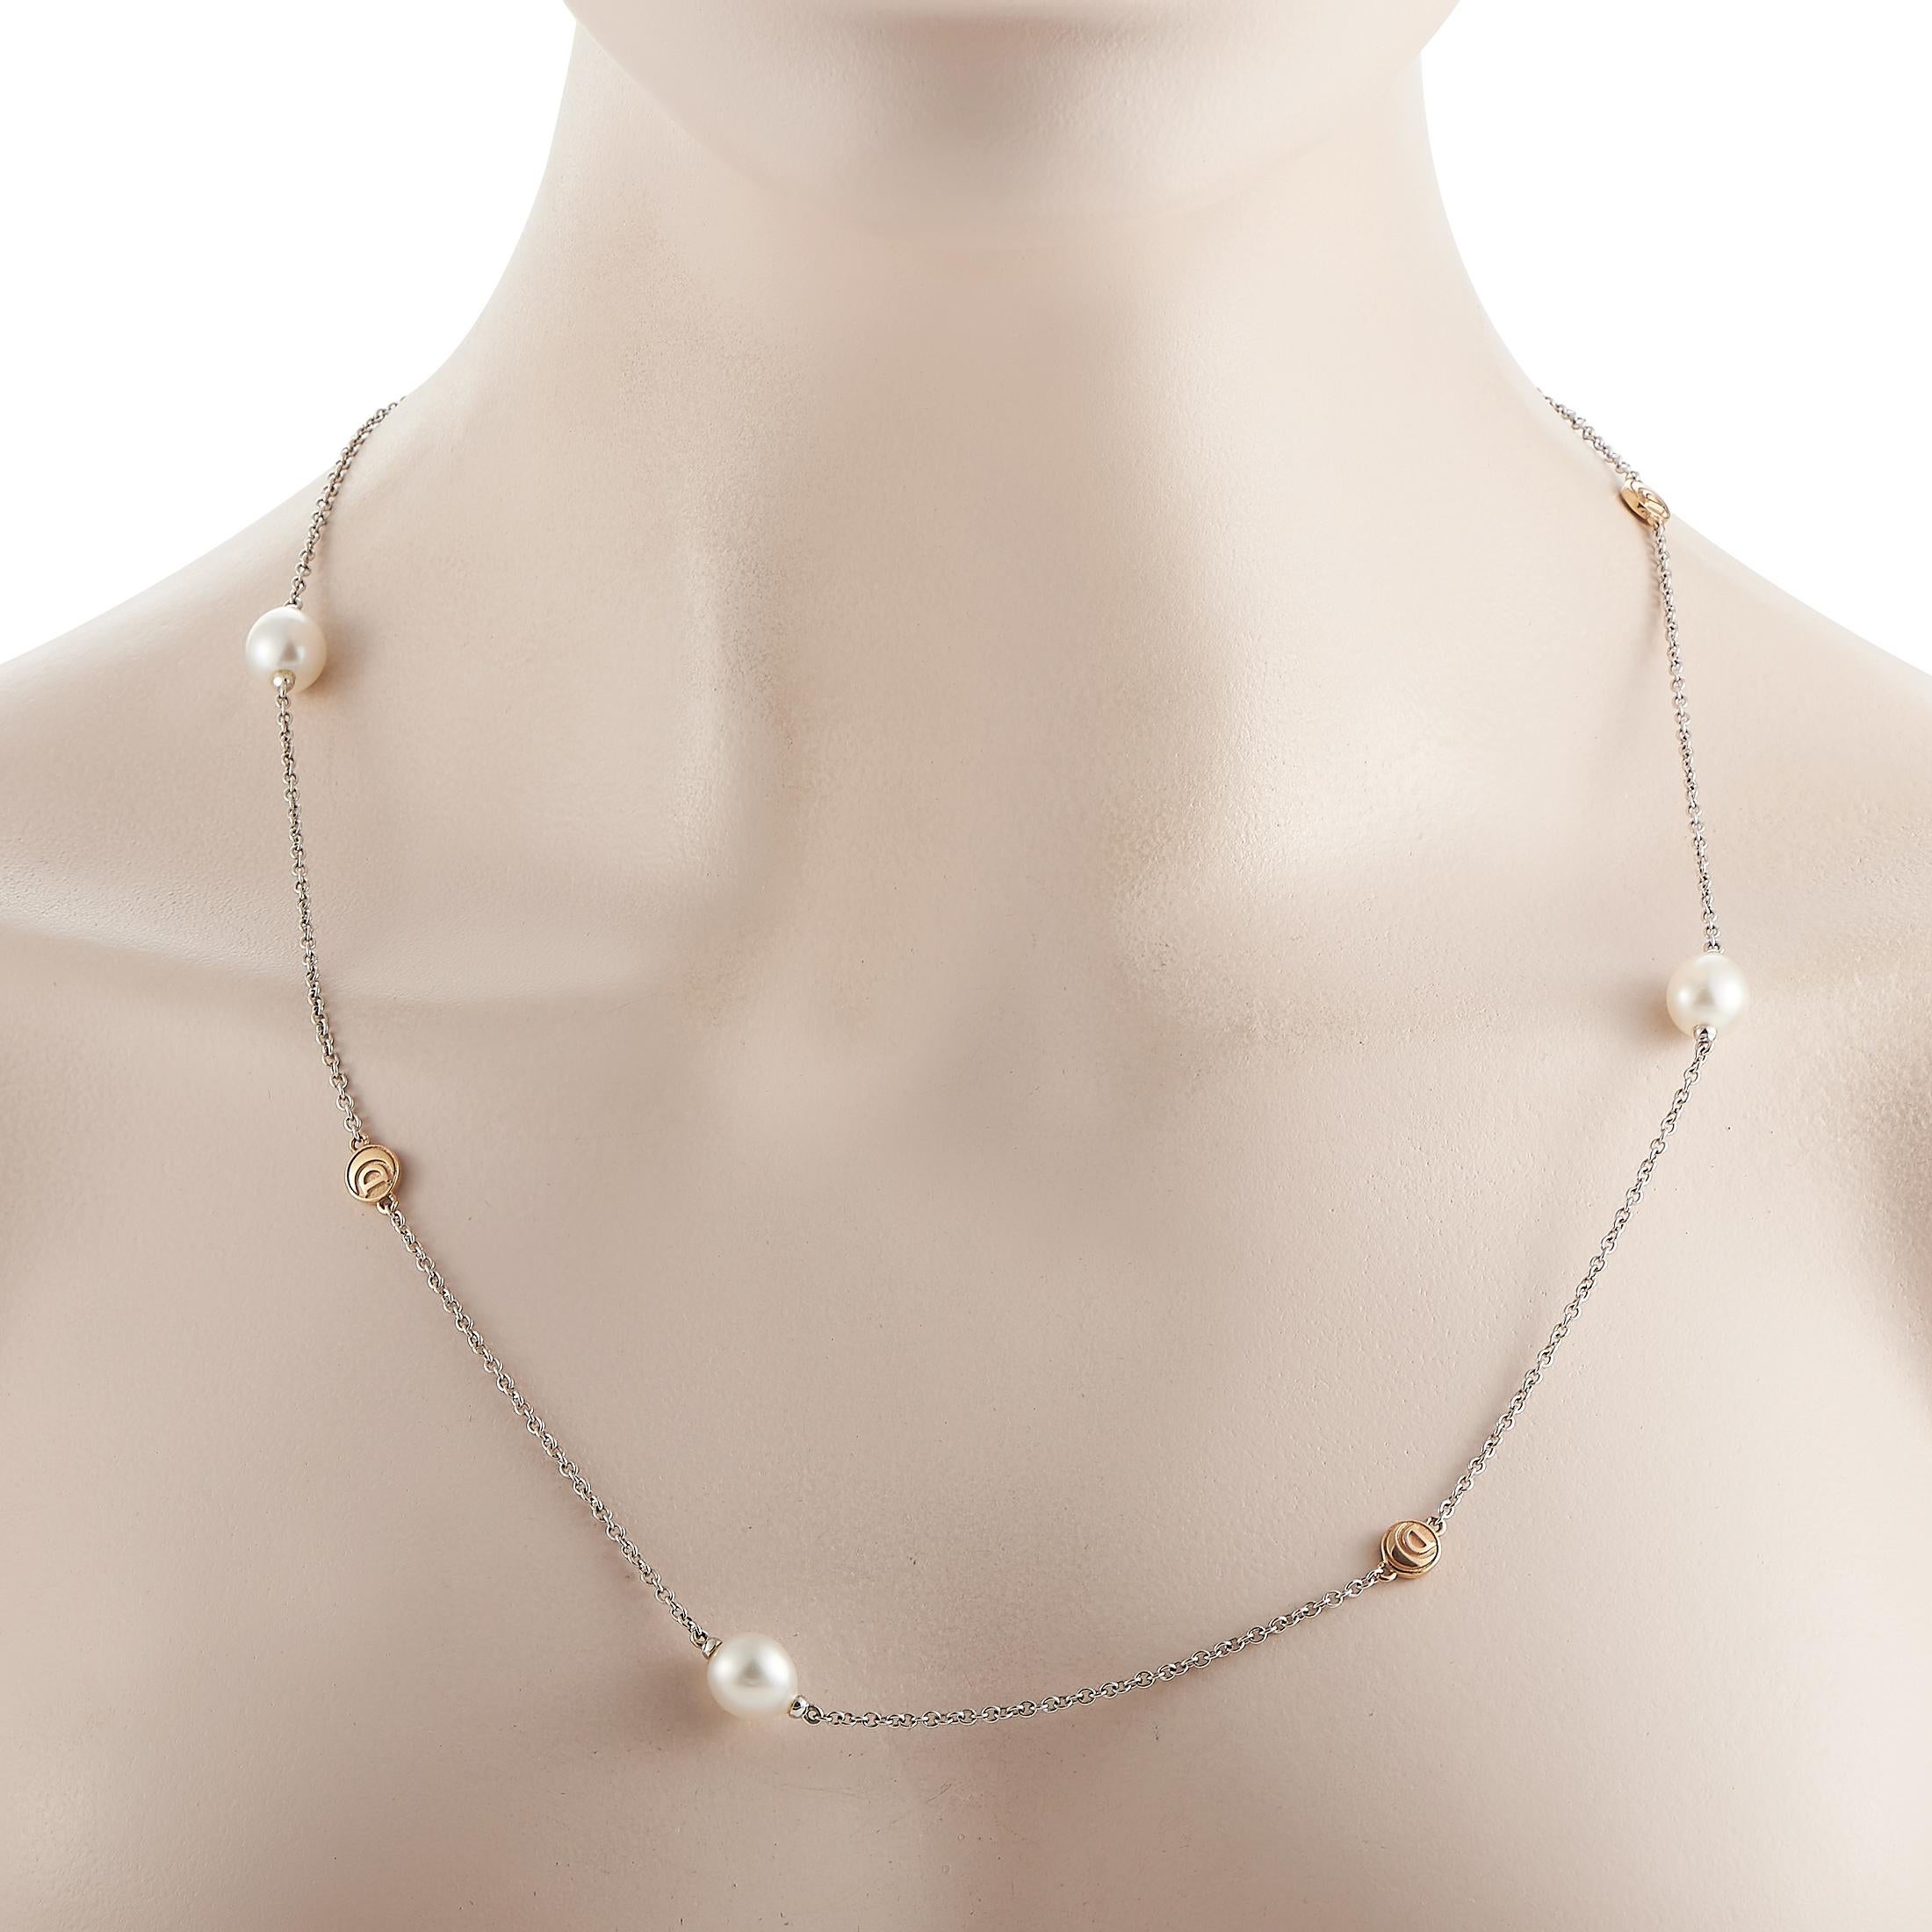 This necklace from Damiani is poised to make a statement. Despite its simple design, this impeccably crafted piece comes to life thanks to thoughtfully placed pearls and 18K Rose Gold accents that come complete with the brand’s signature - all set